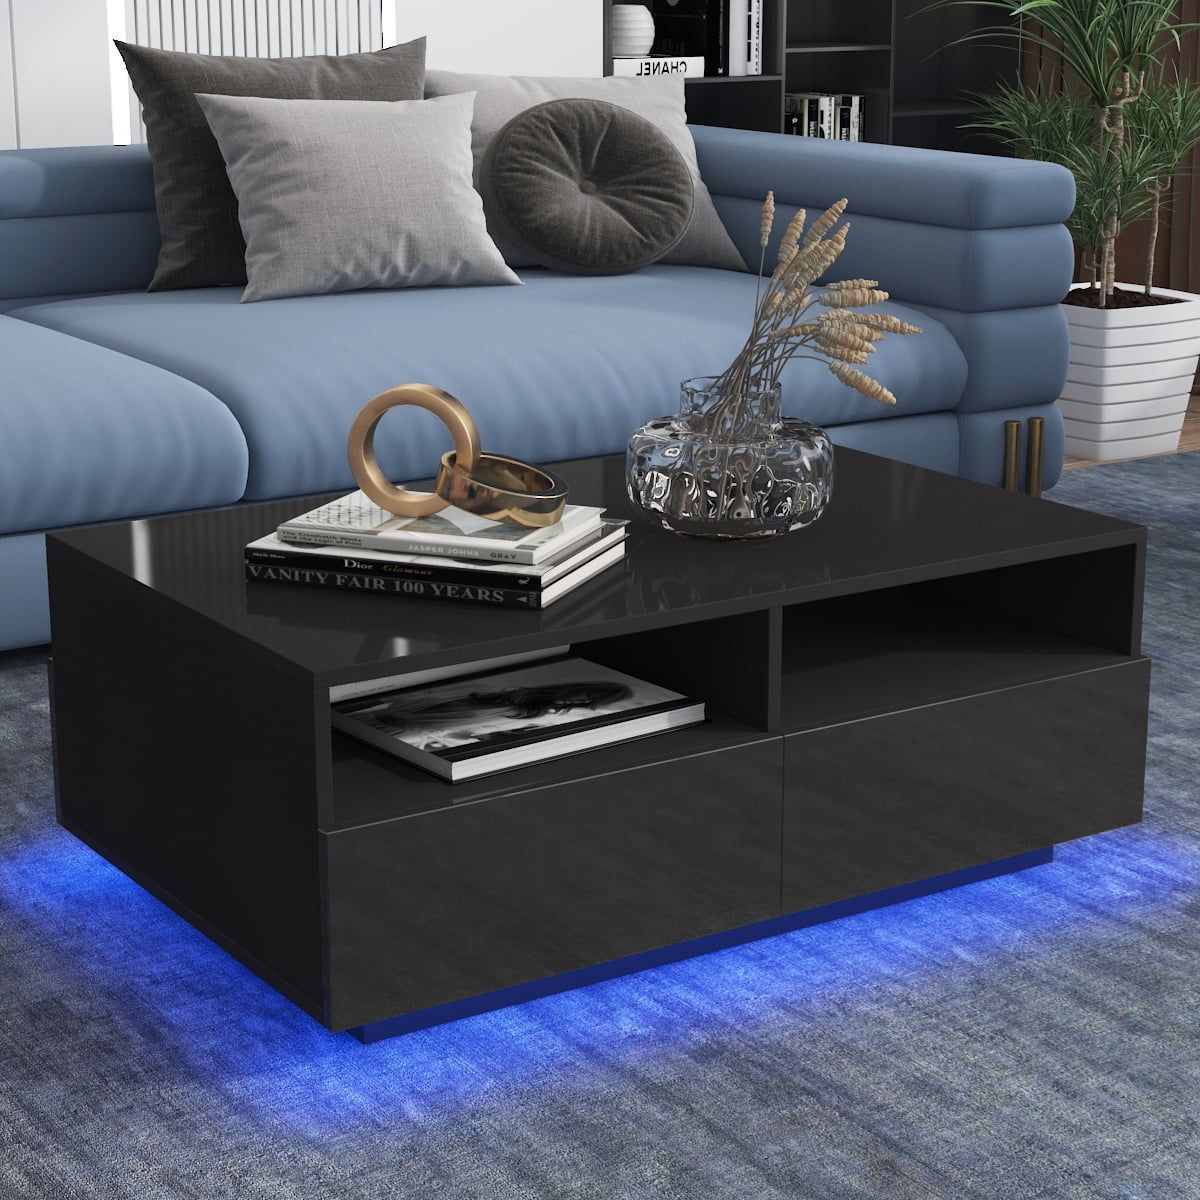 Led Coffee Tables With 4 Drawers For Most Recent Hommpa Coffee Table With 4 Drawers And Open Shelf Led Center Table Sofa Side  Tea Tables Black High Gloss Finish – Walmart (View 6 of 10)